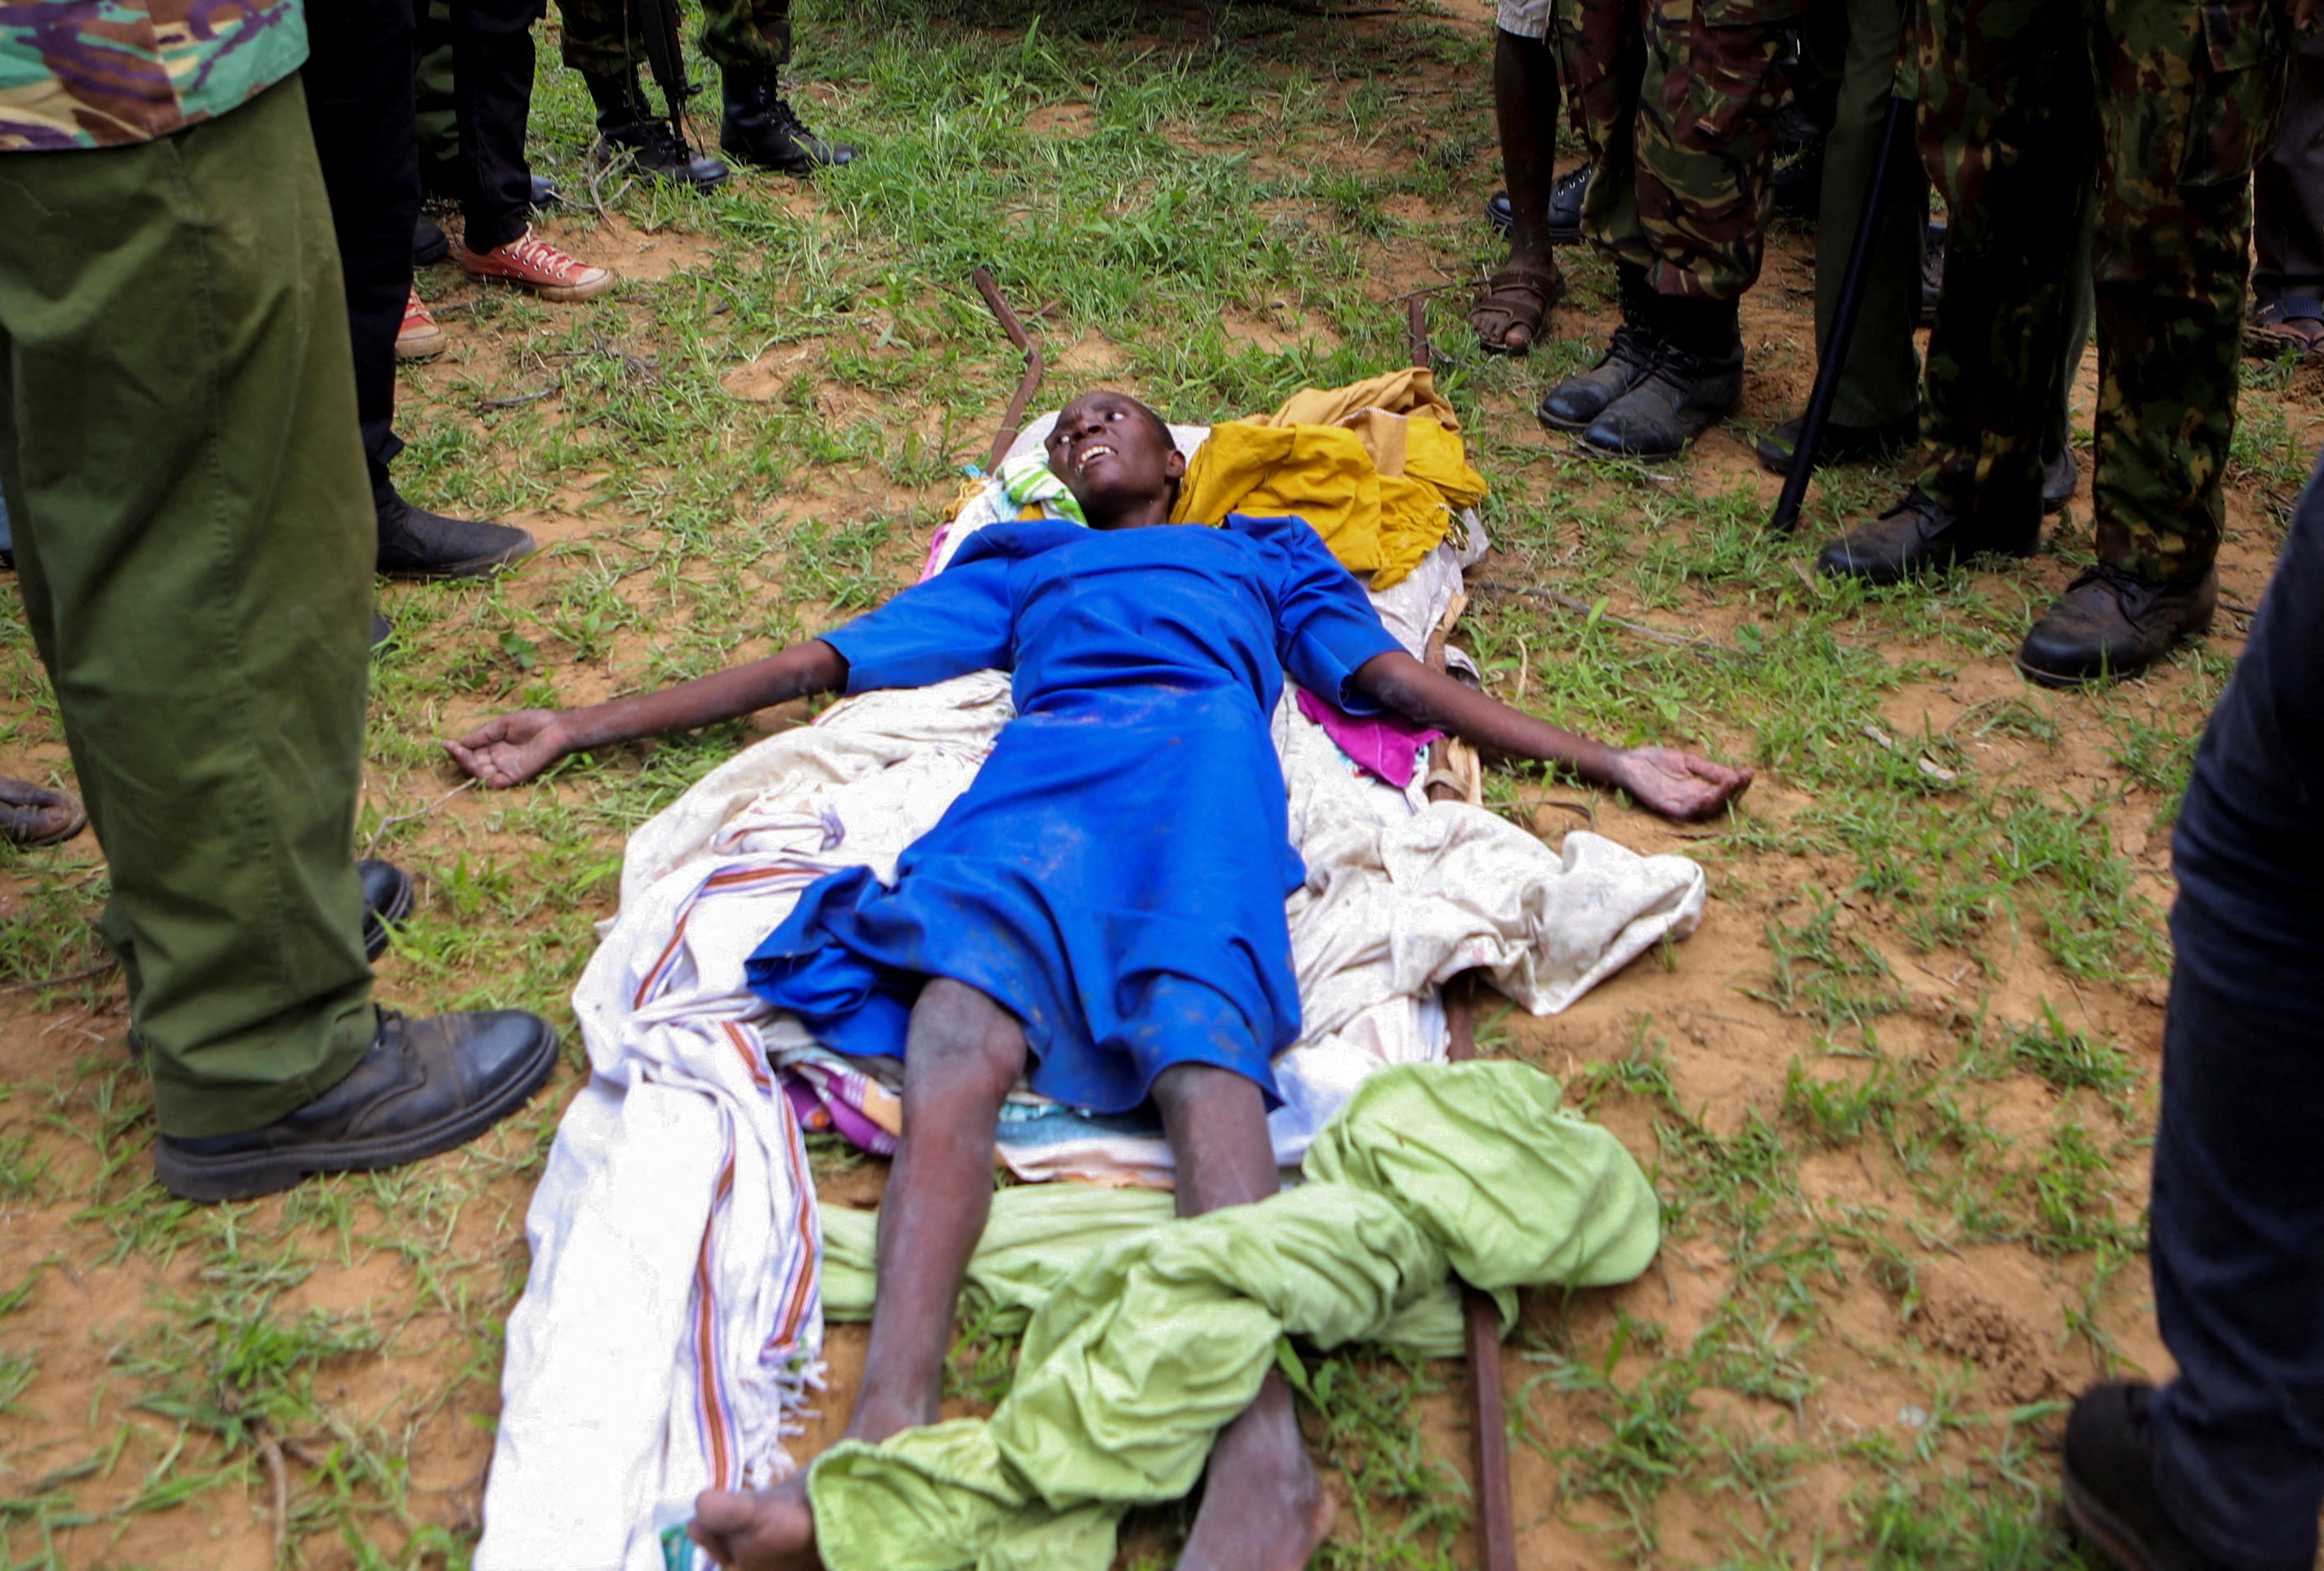 An emaciated member of a Christian cult named as Good News International Church, whose members believed they would go to heaven if they starved themselves to death, is guarded by Kenya police officers and officials from the civil society in Shakahola forest on 23 April